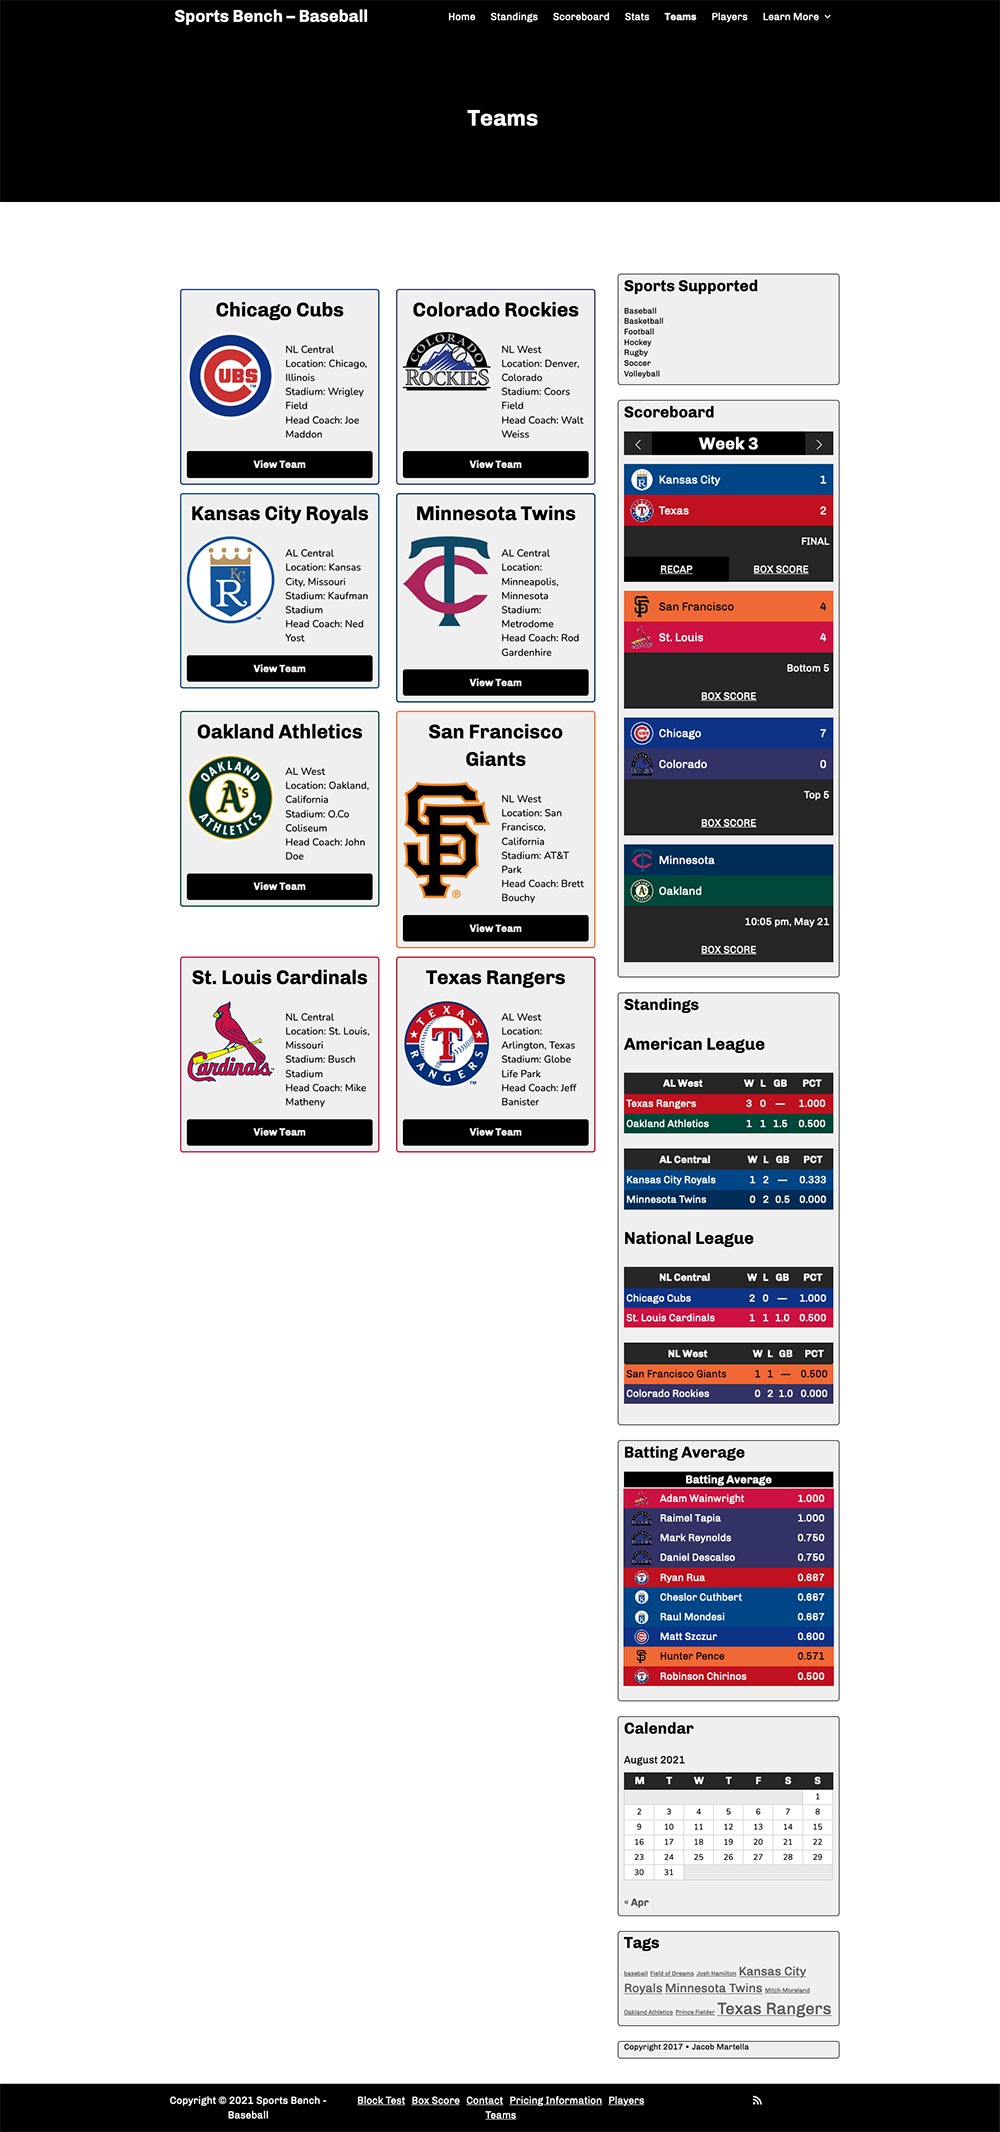 Screenshot of the baseball teams page in Sports Bench